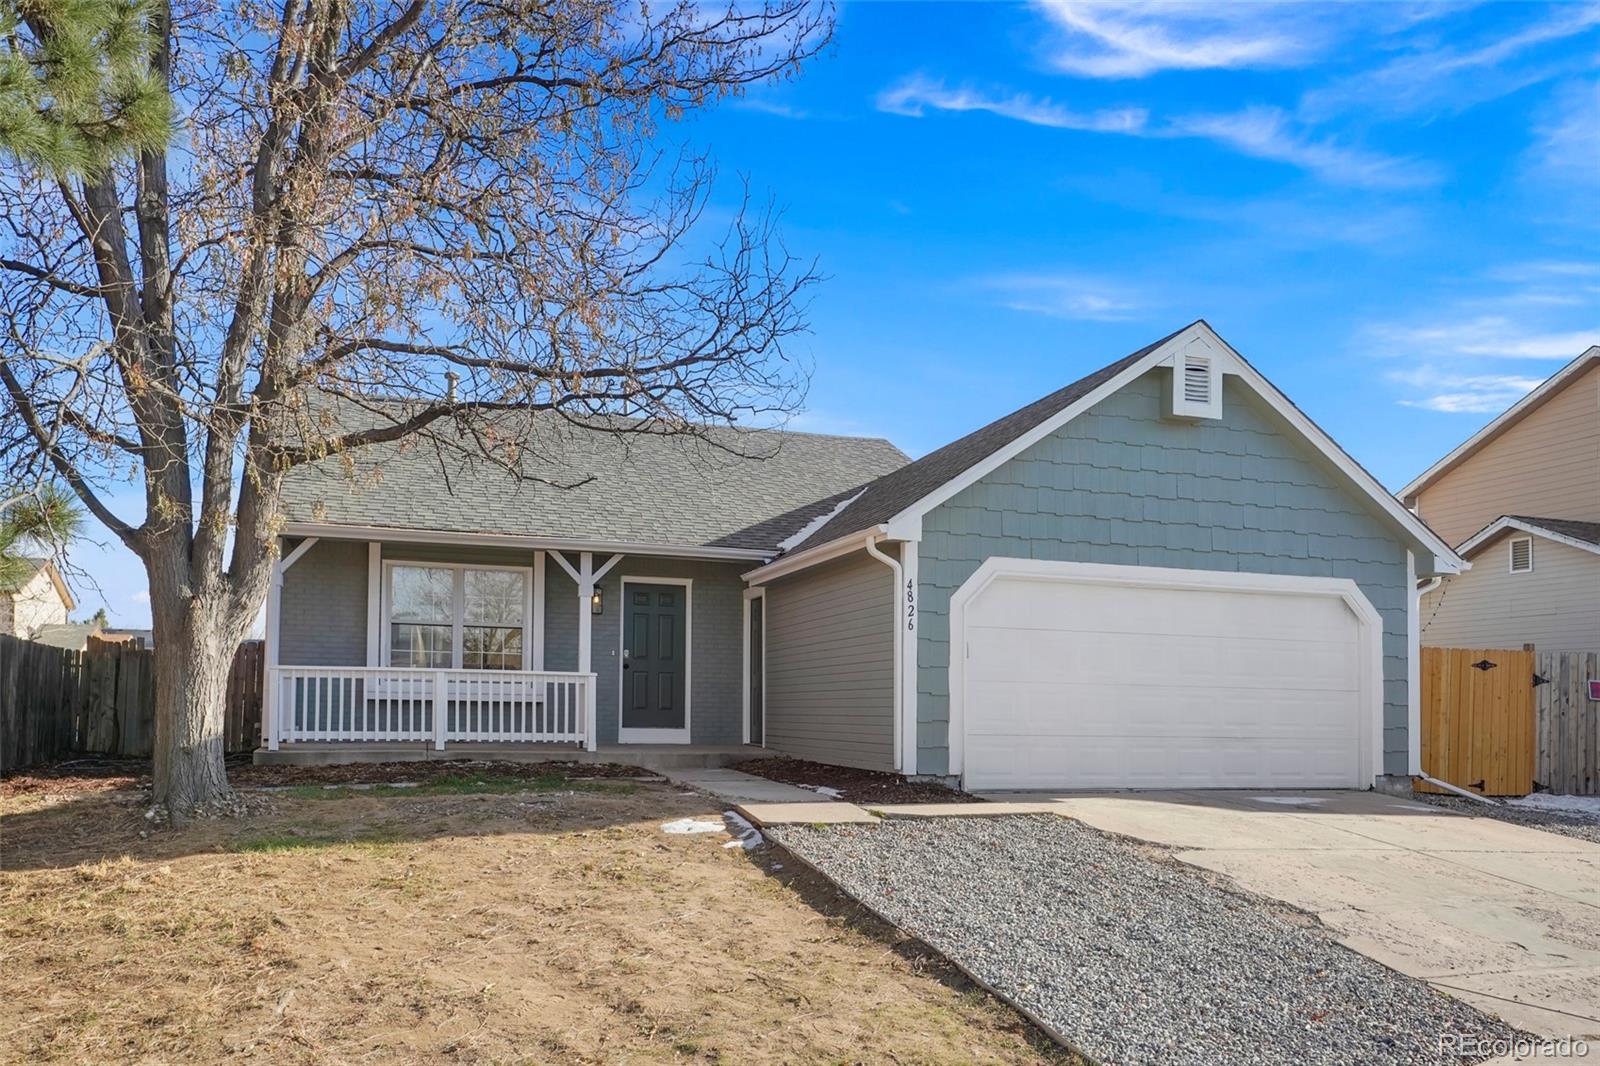 4826  carson street, Denver sold home. Closed on 2024-03-08 for $460,000.